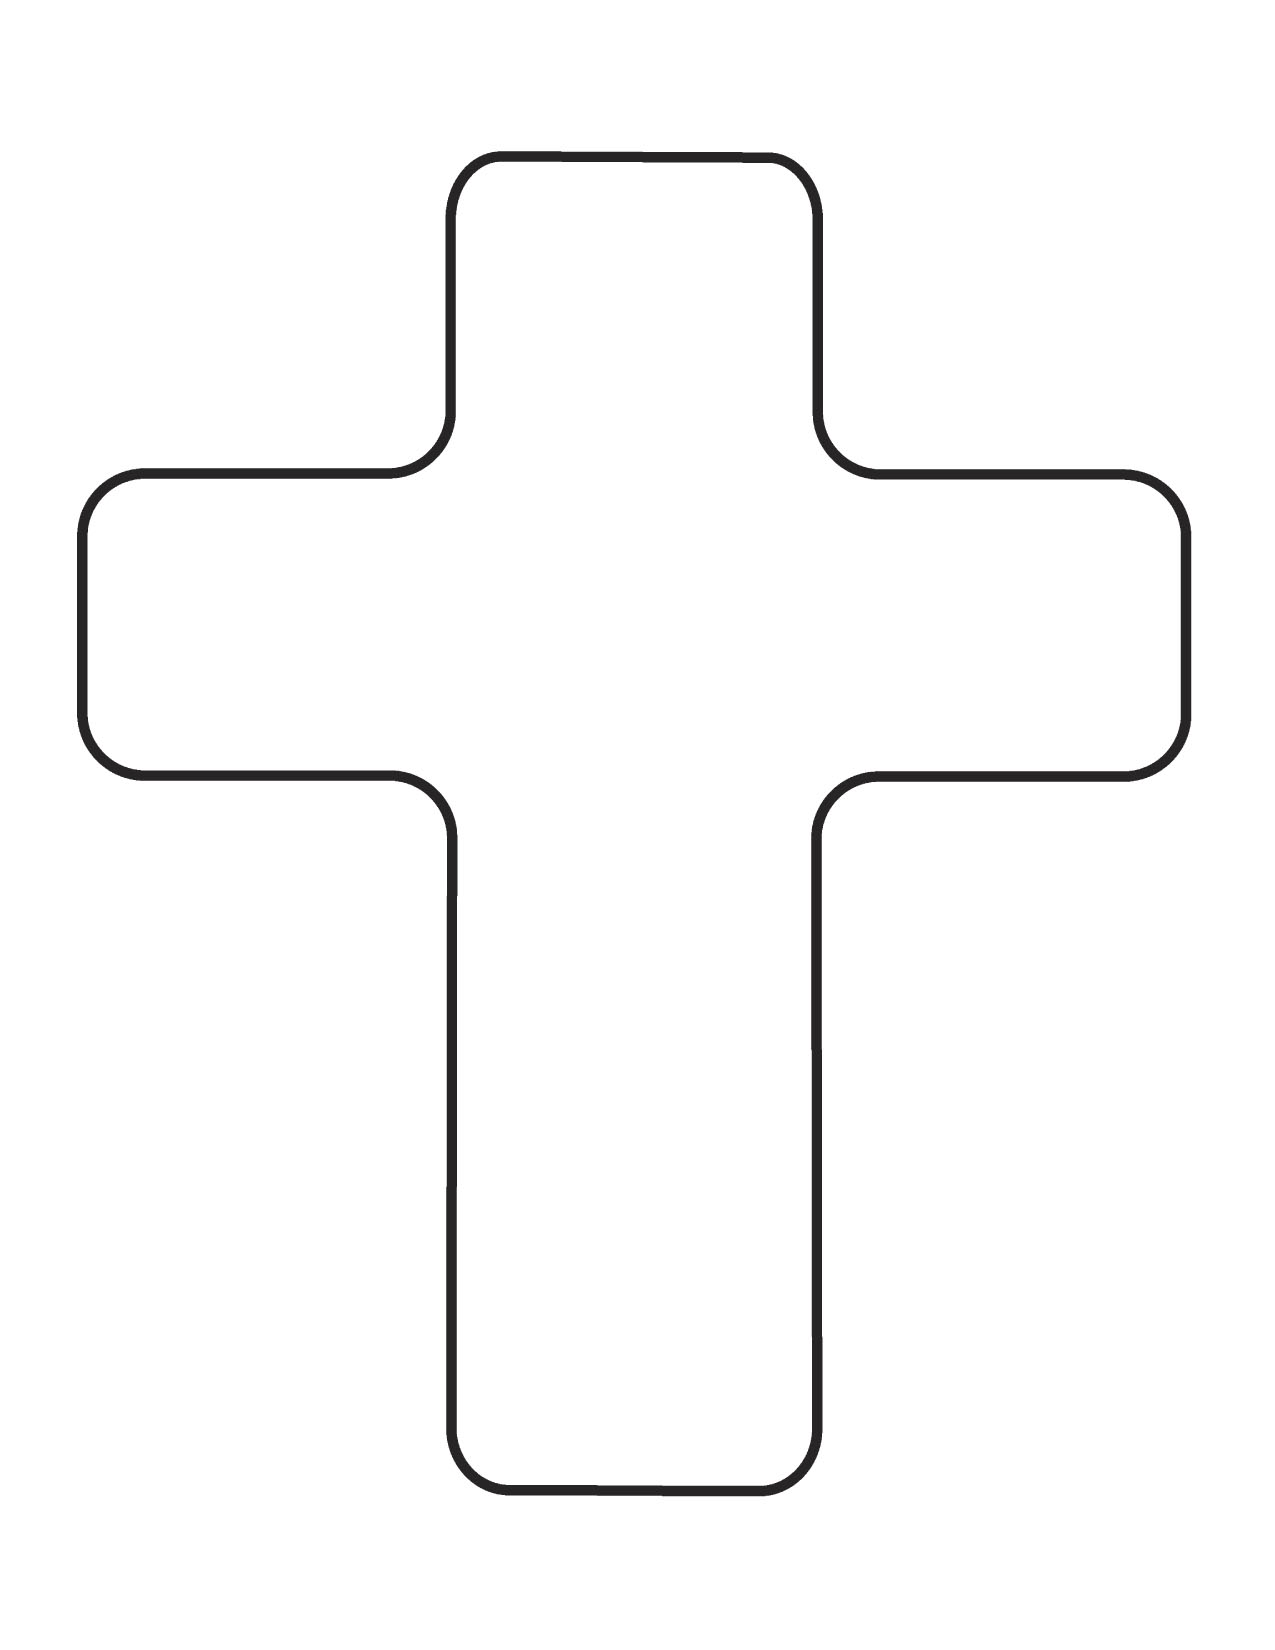 White Cross Clipart | Clipart Panda - Free Clipart Images